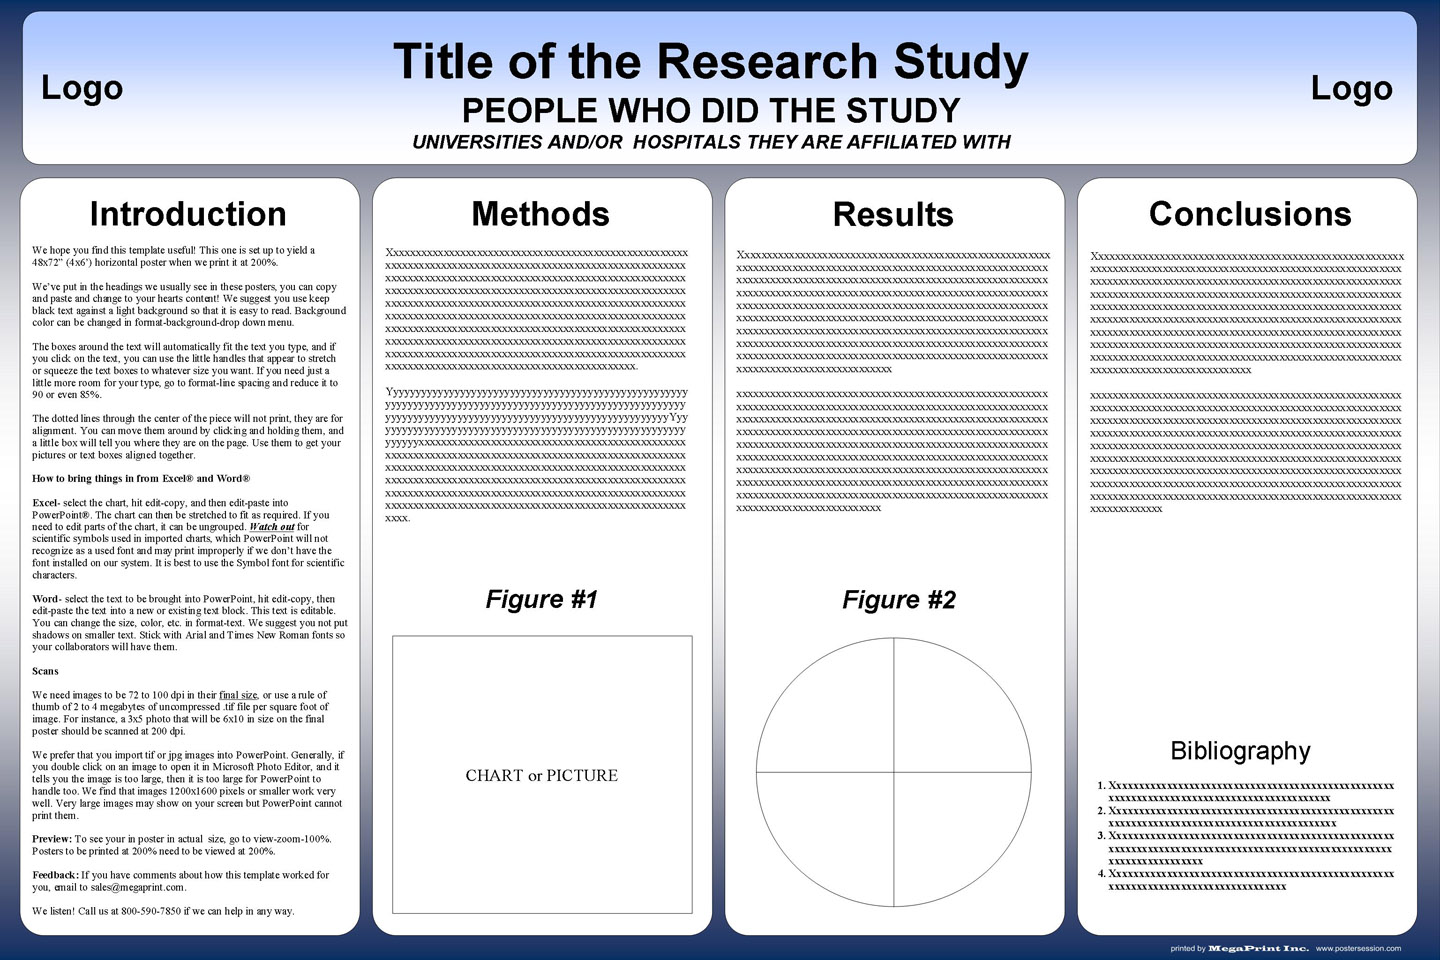 Literature review internet research